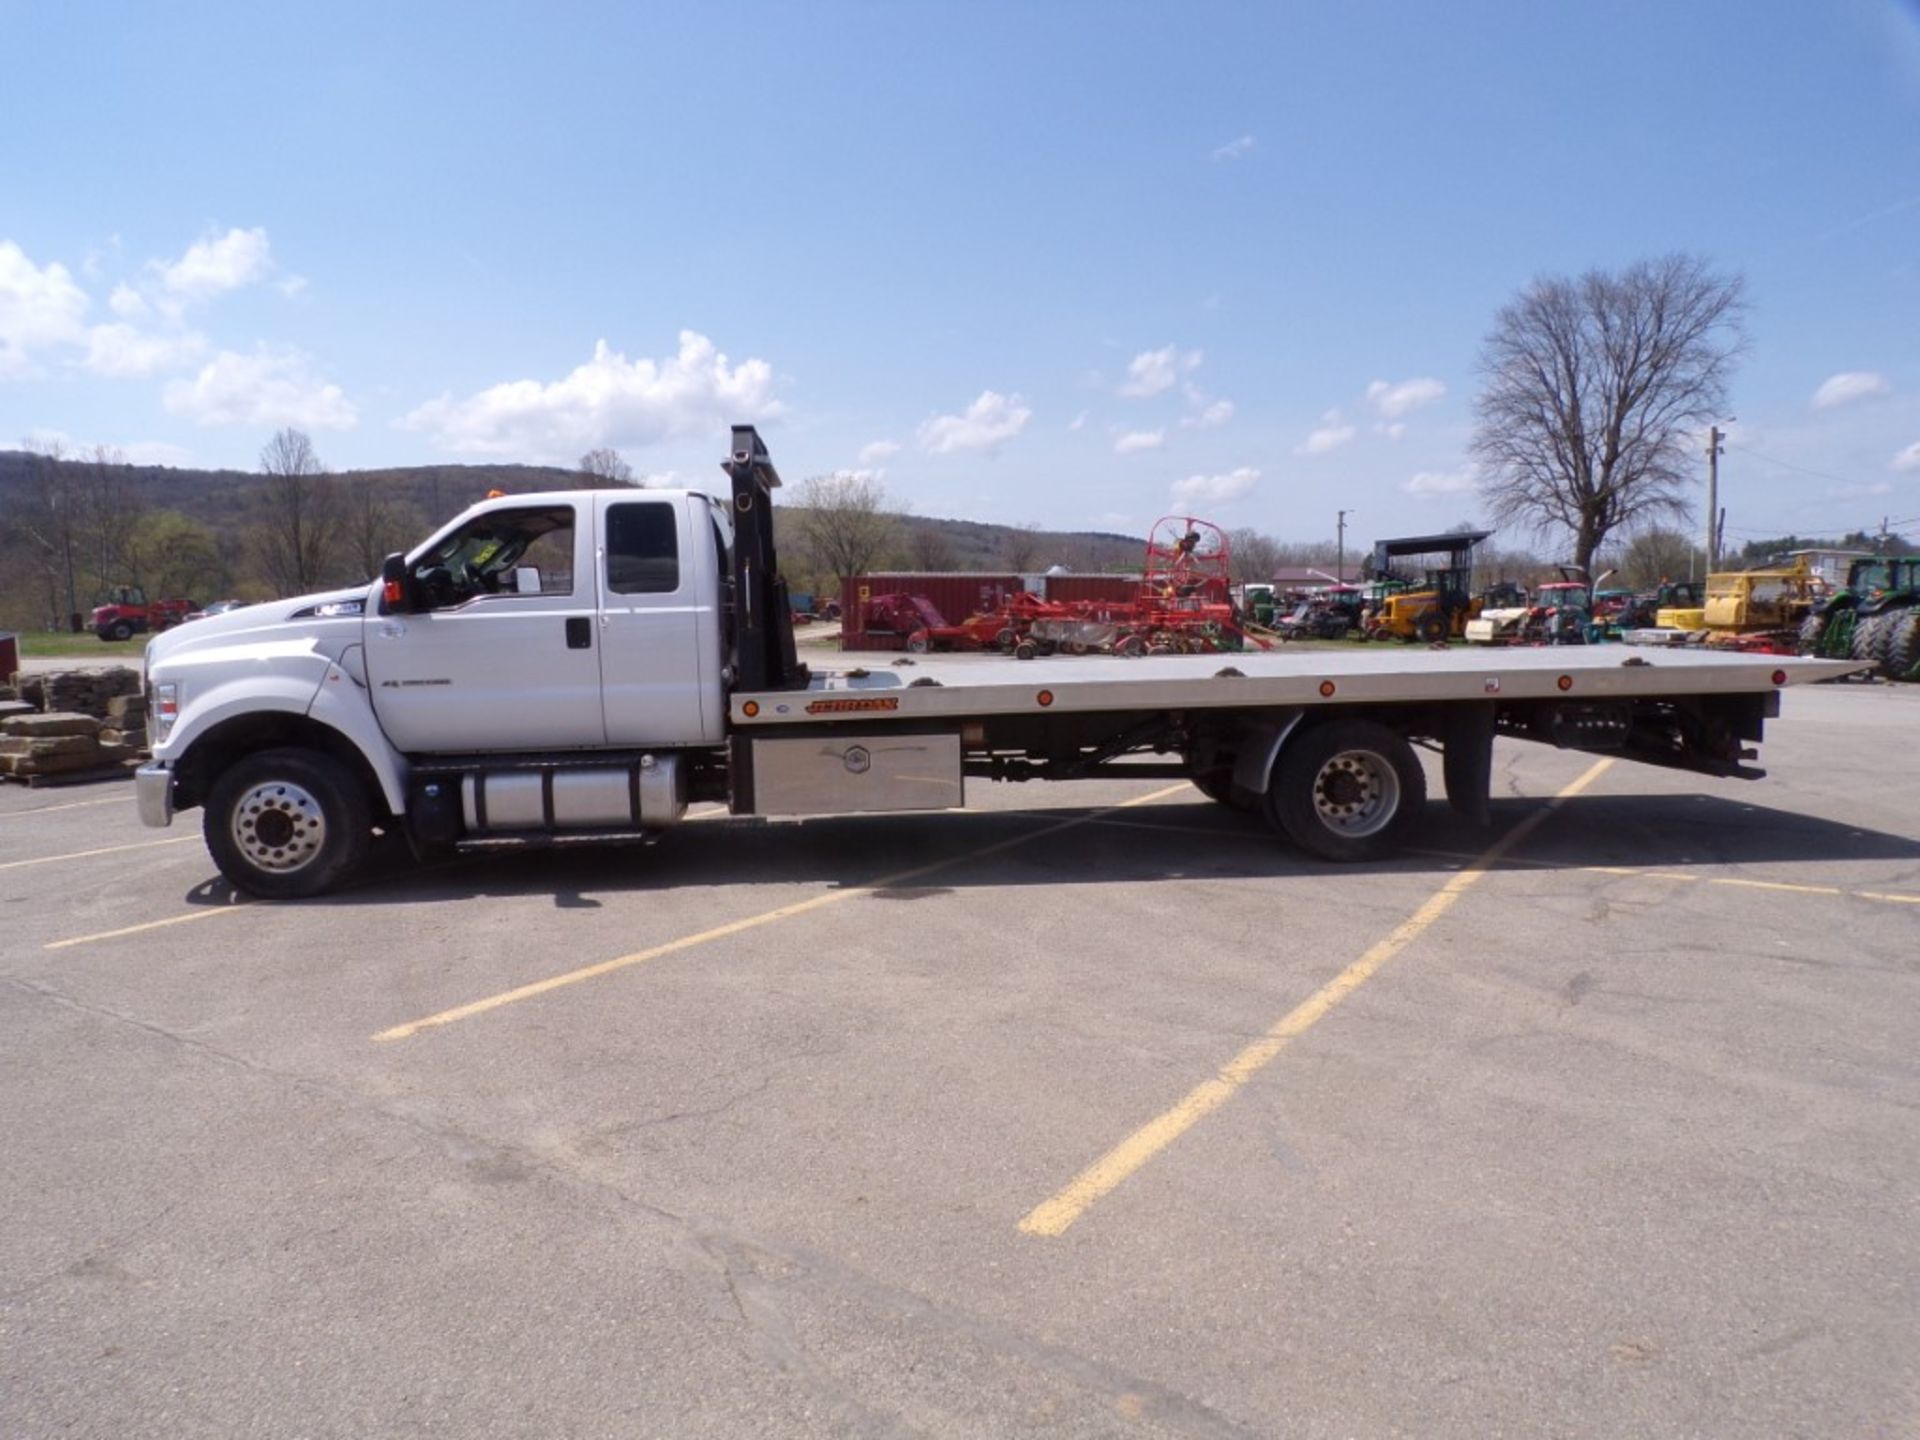 2018 Ford F650 Ext. Cab, Rollback Truck, 6.7 Dsl. Engine, Auto Trans, Air Brakes, 25,900 GVWR, - Image 5 of 13